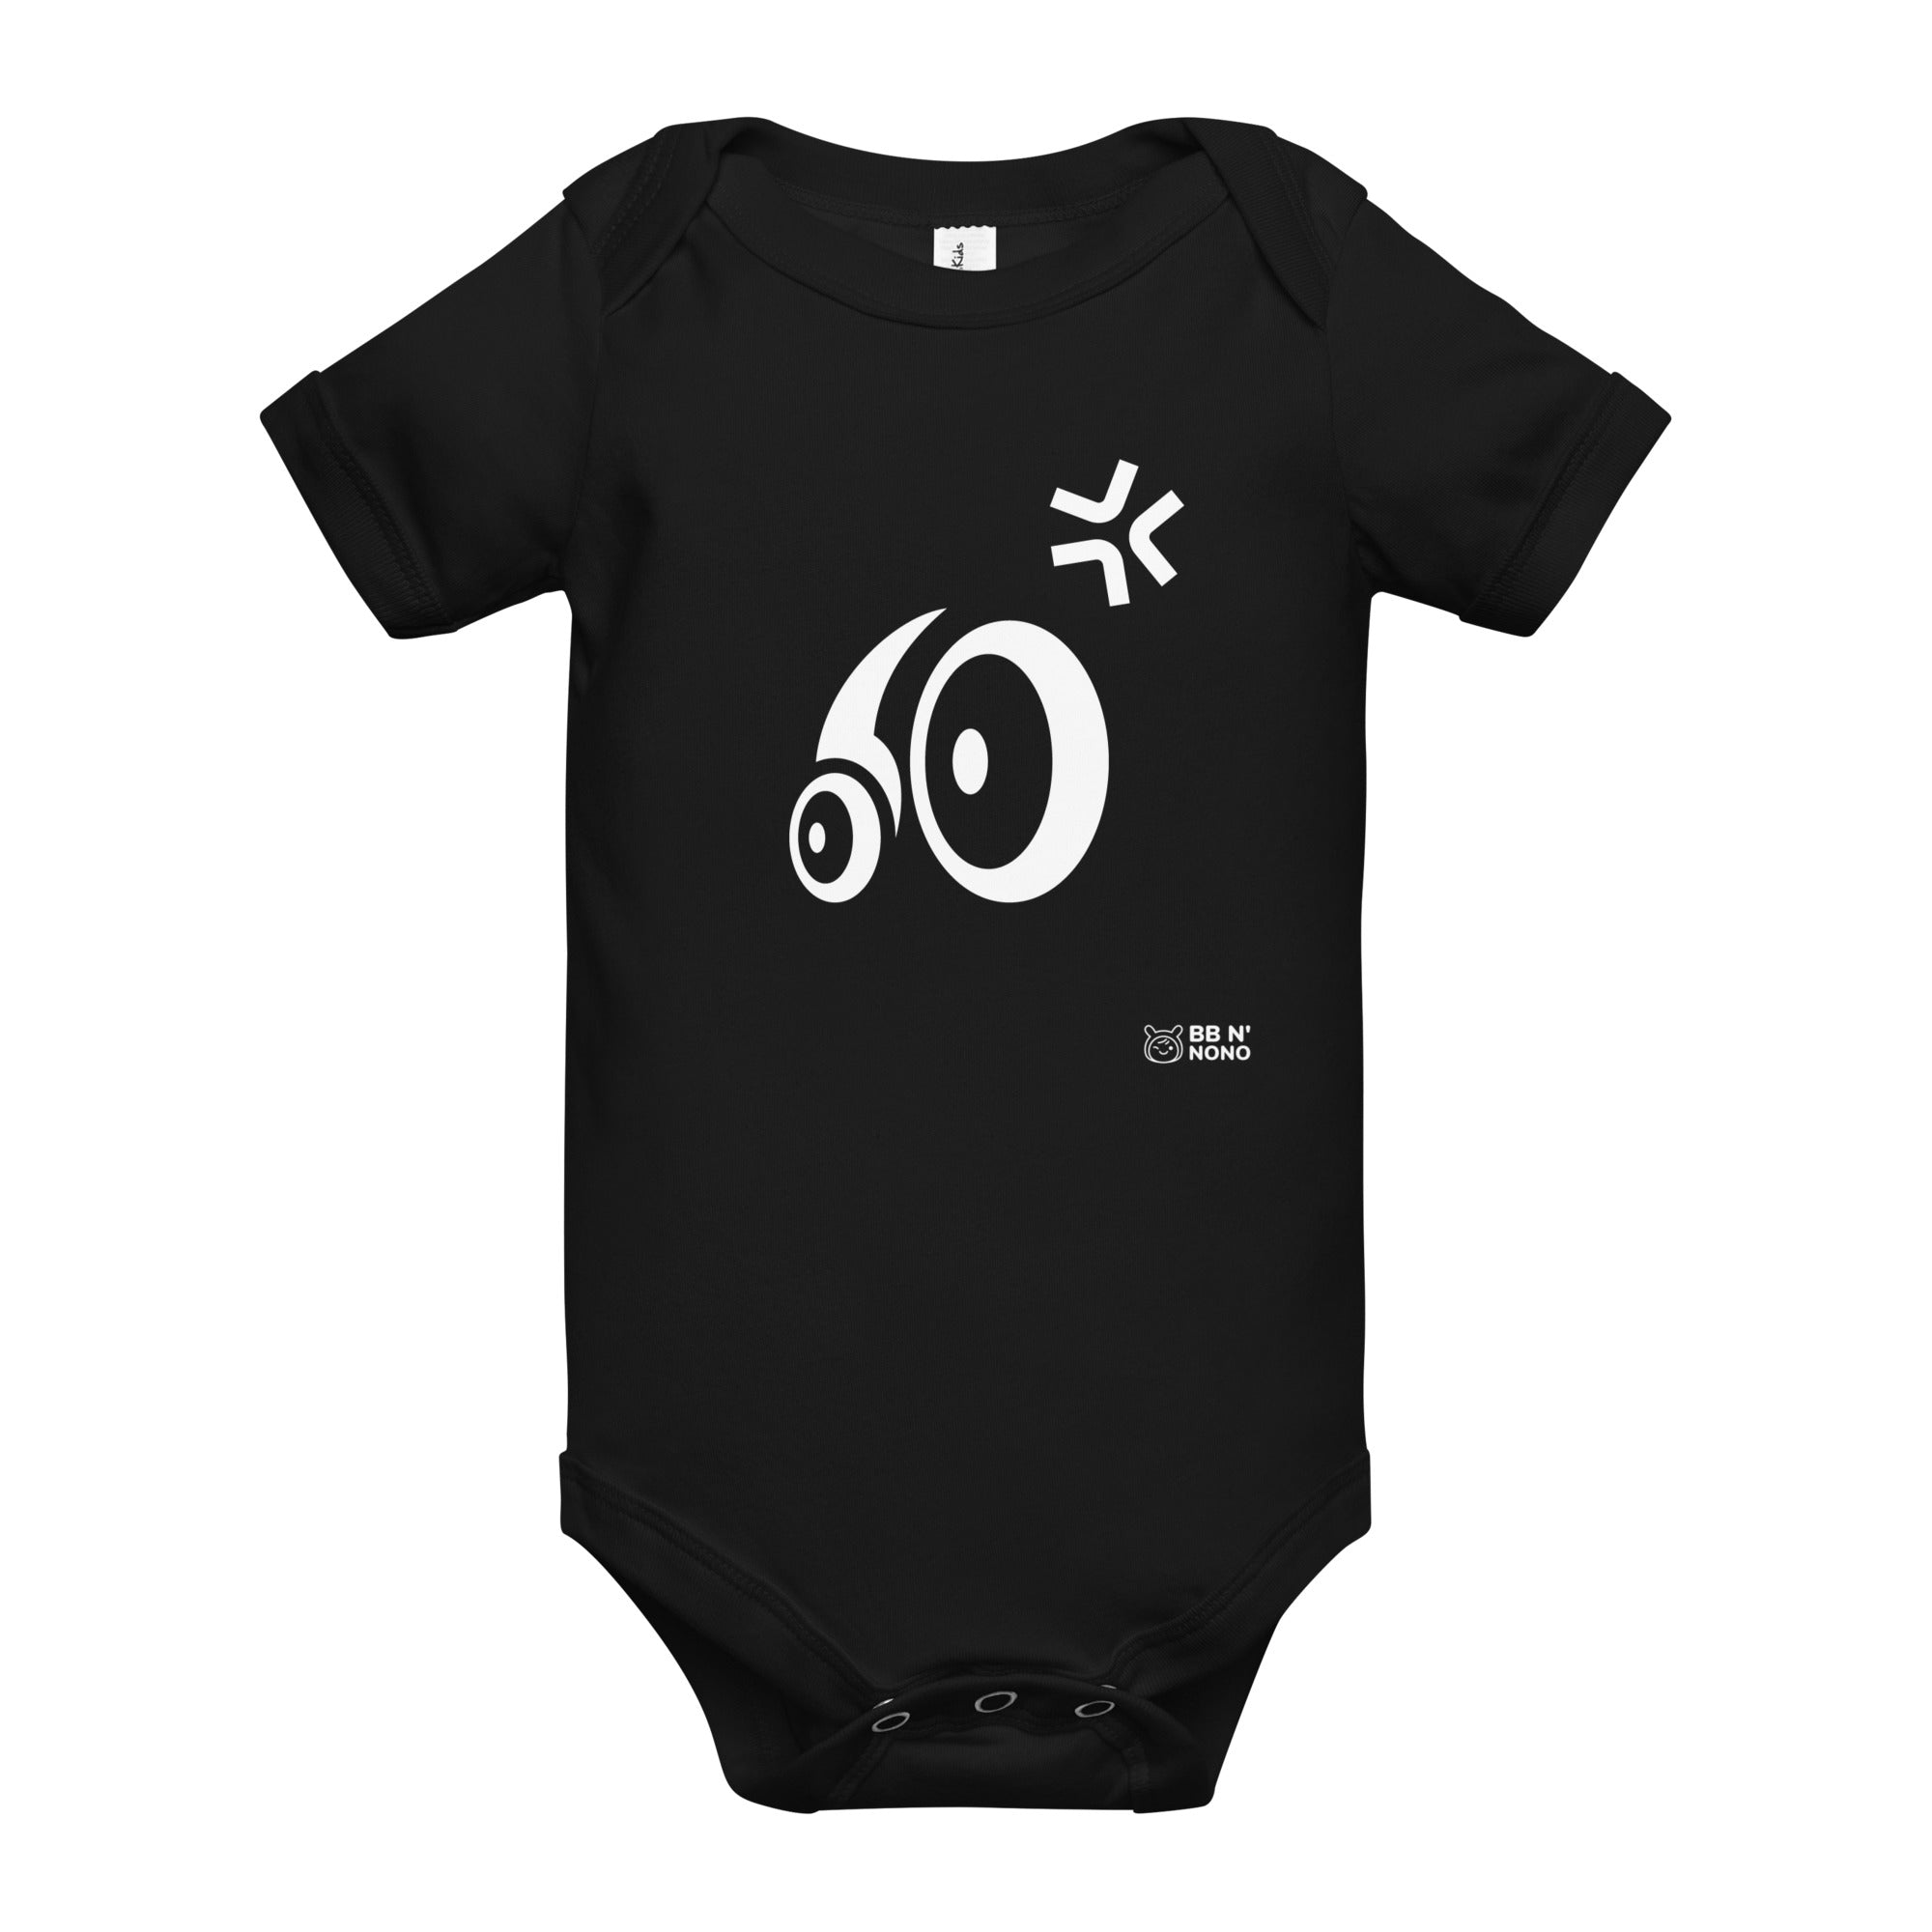 Furious Tot - Baby short sleeve one piece